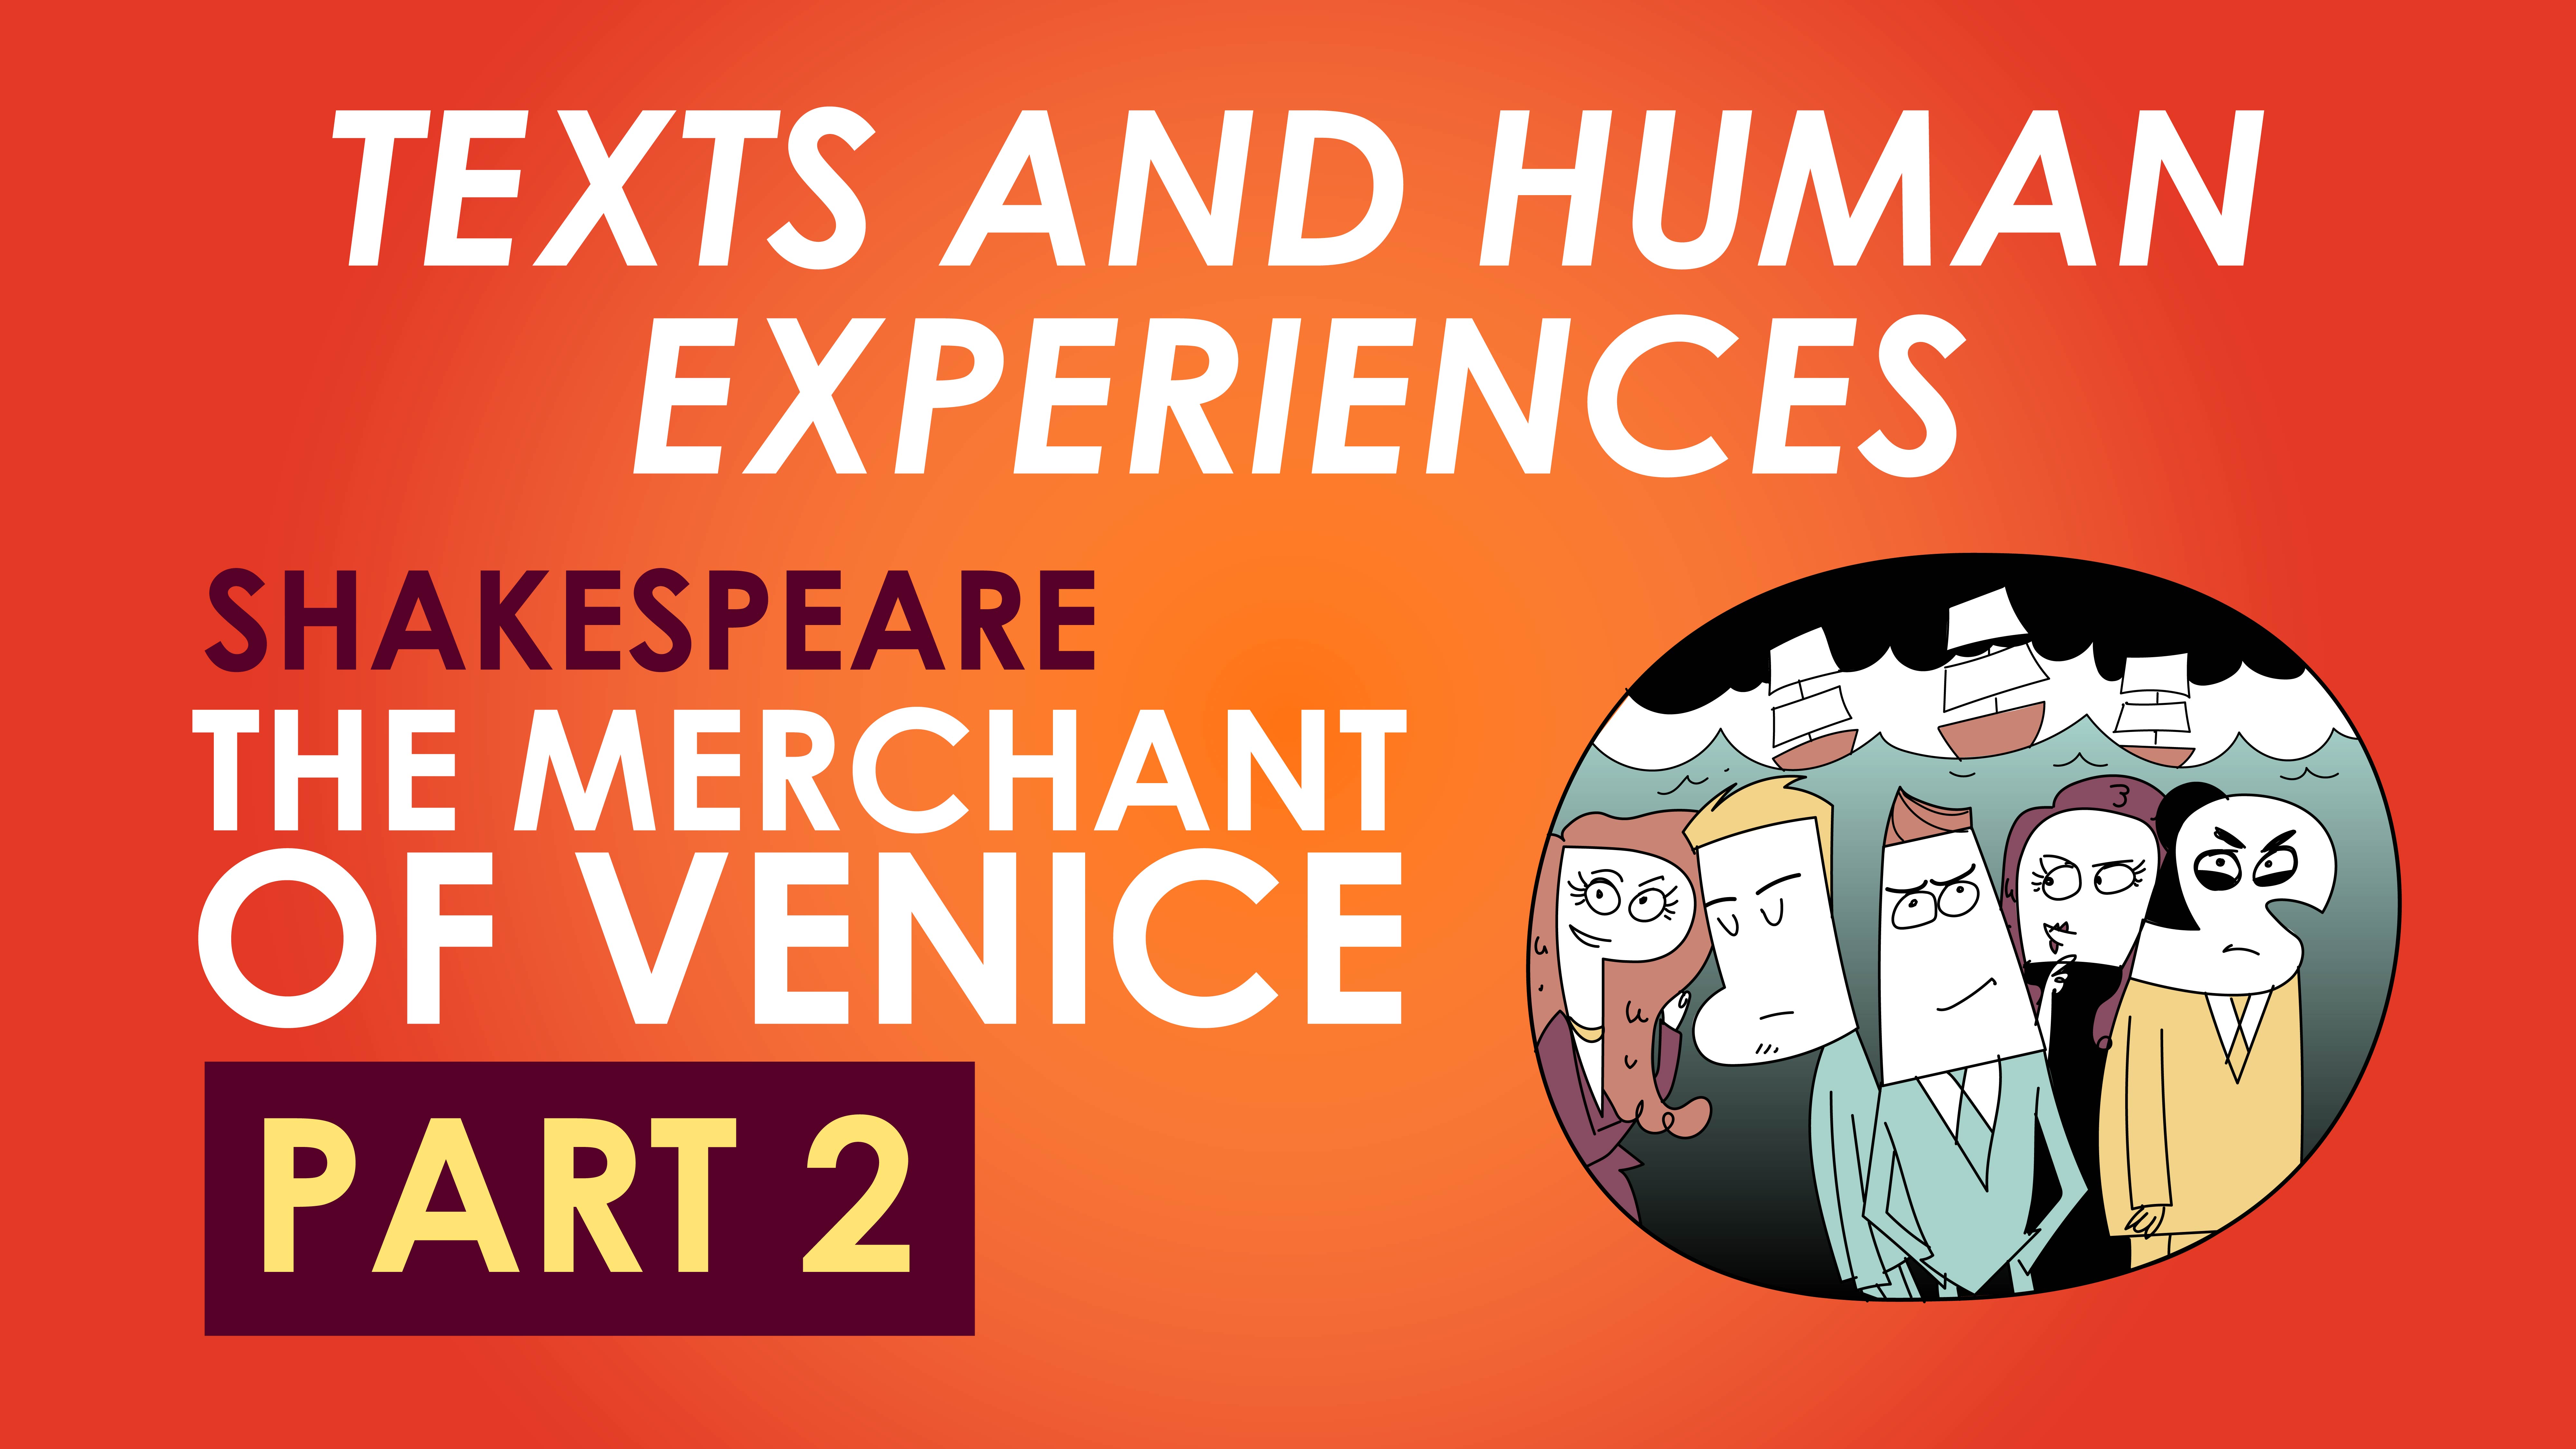 HSC Texts and Human Experiences - The Merchant of Venice, by William Shakespeare - Part 2